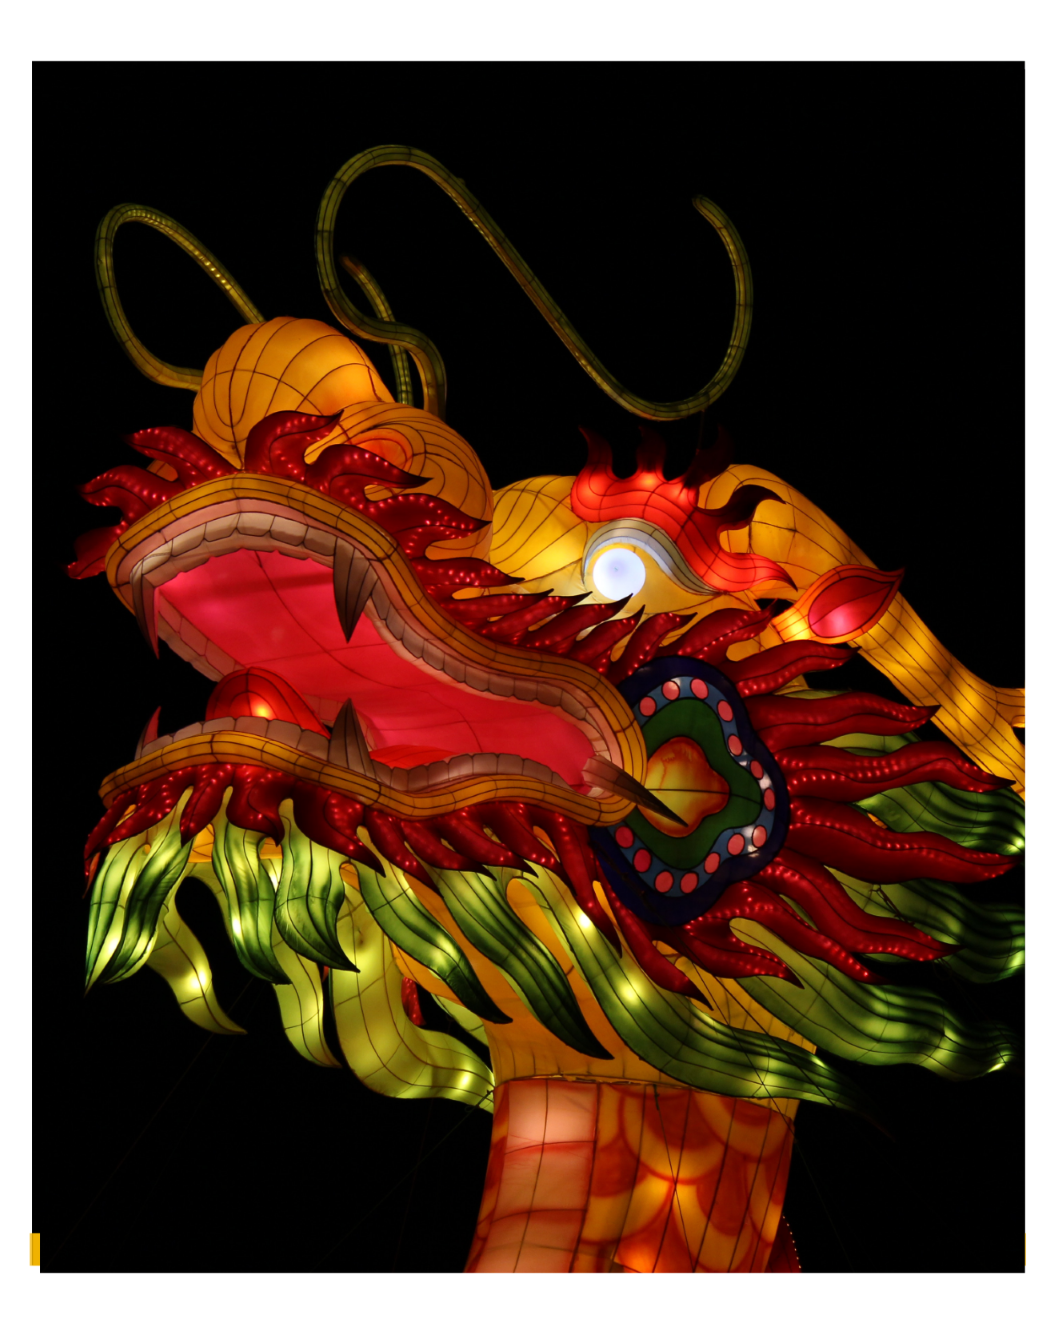 Stunning dragon in honor of the the lunar new year of the dragon